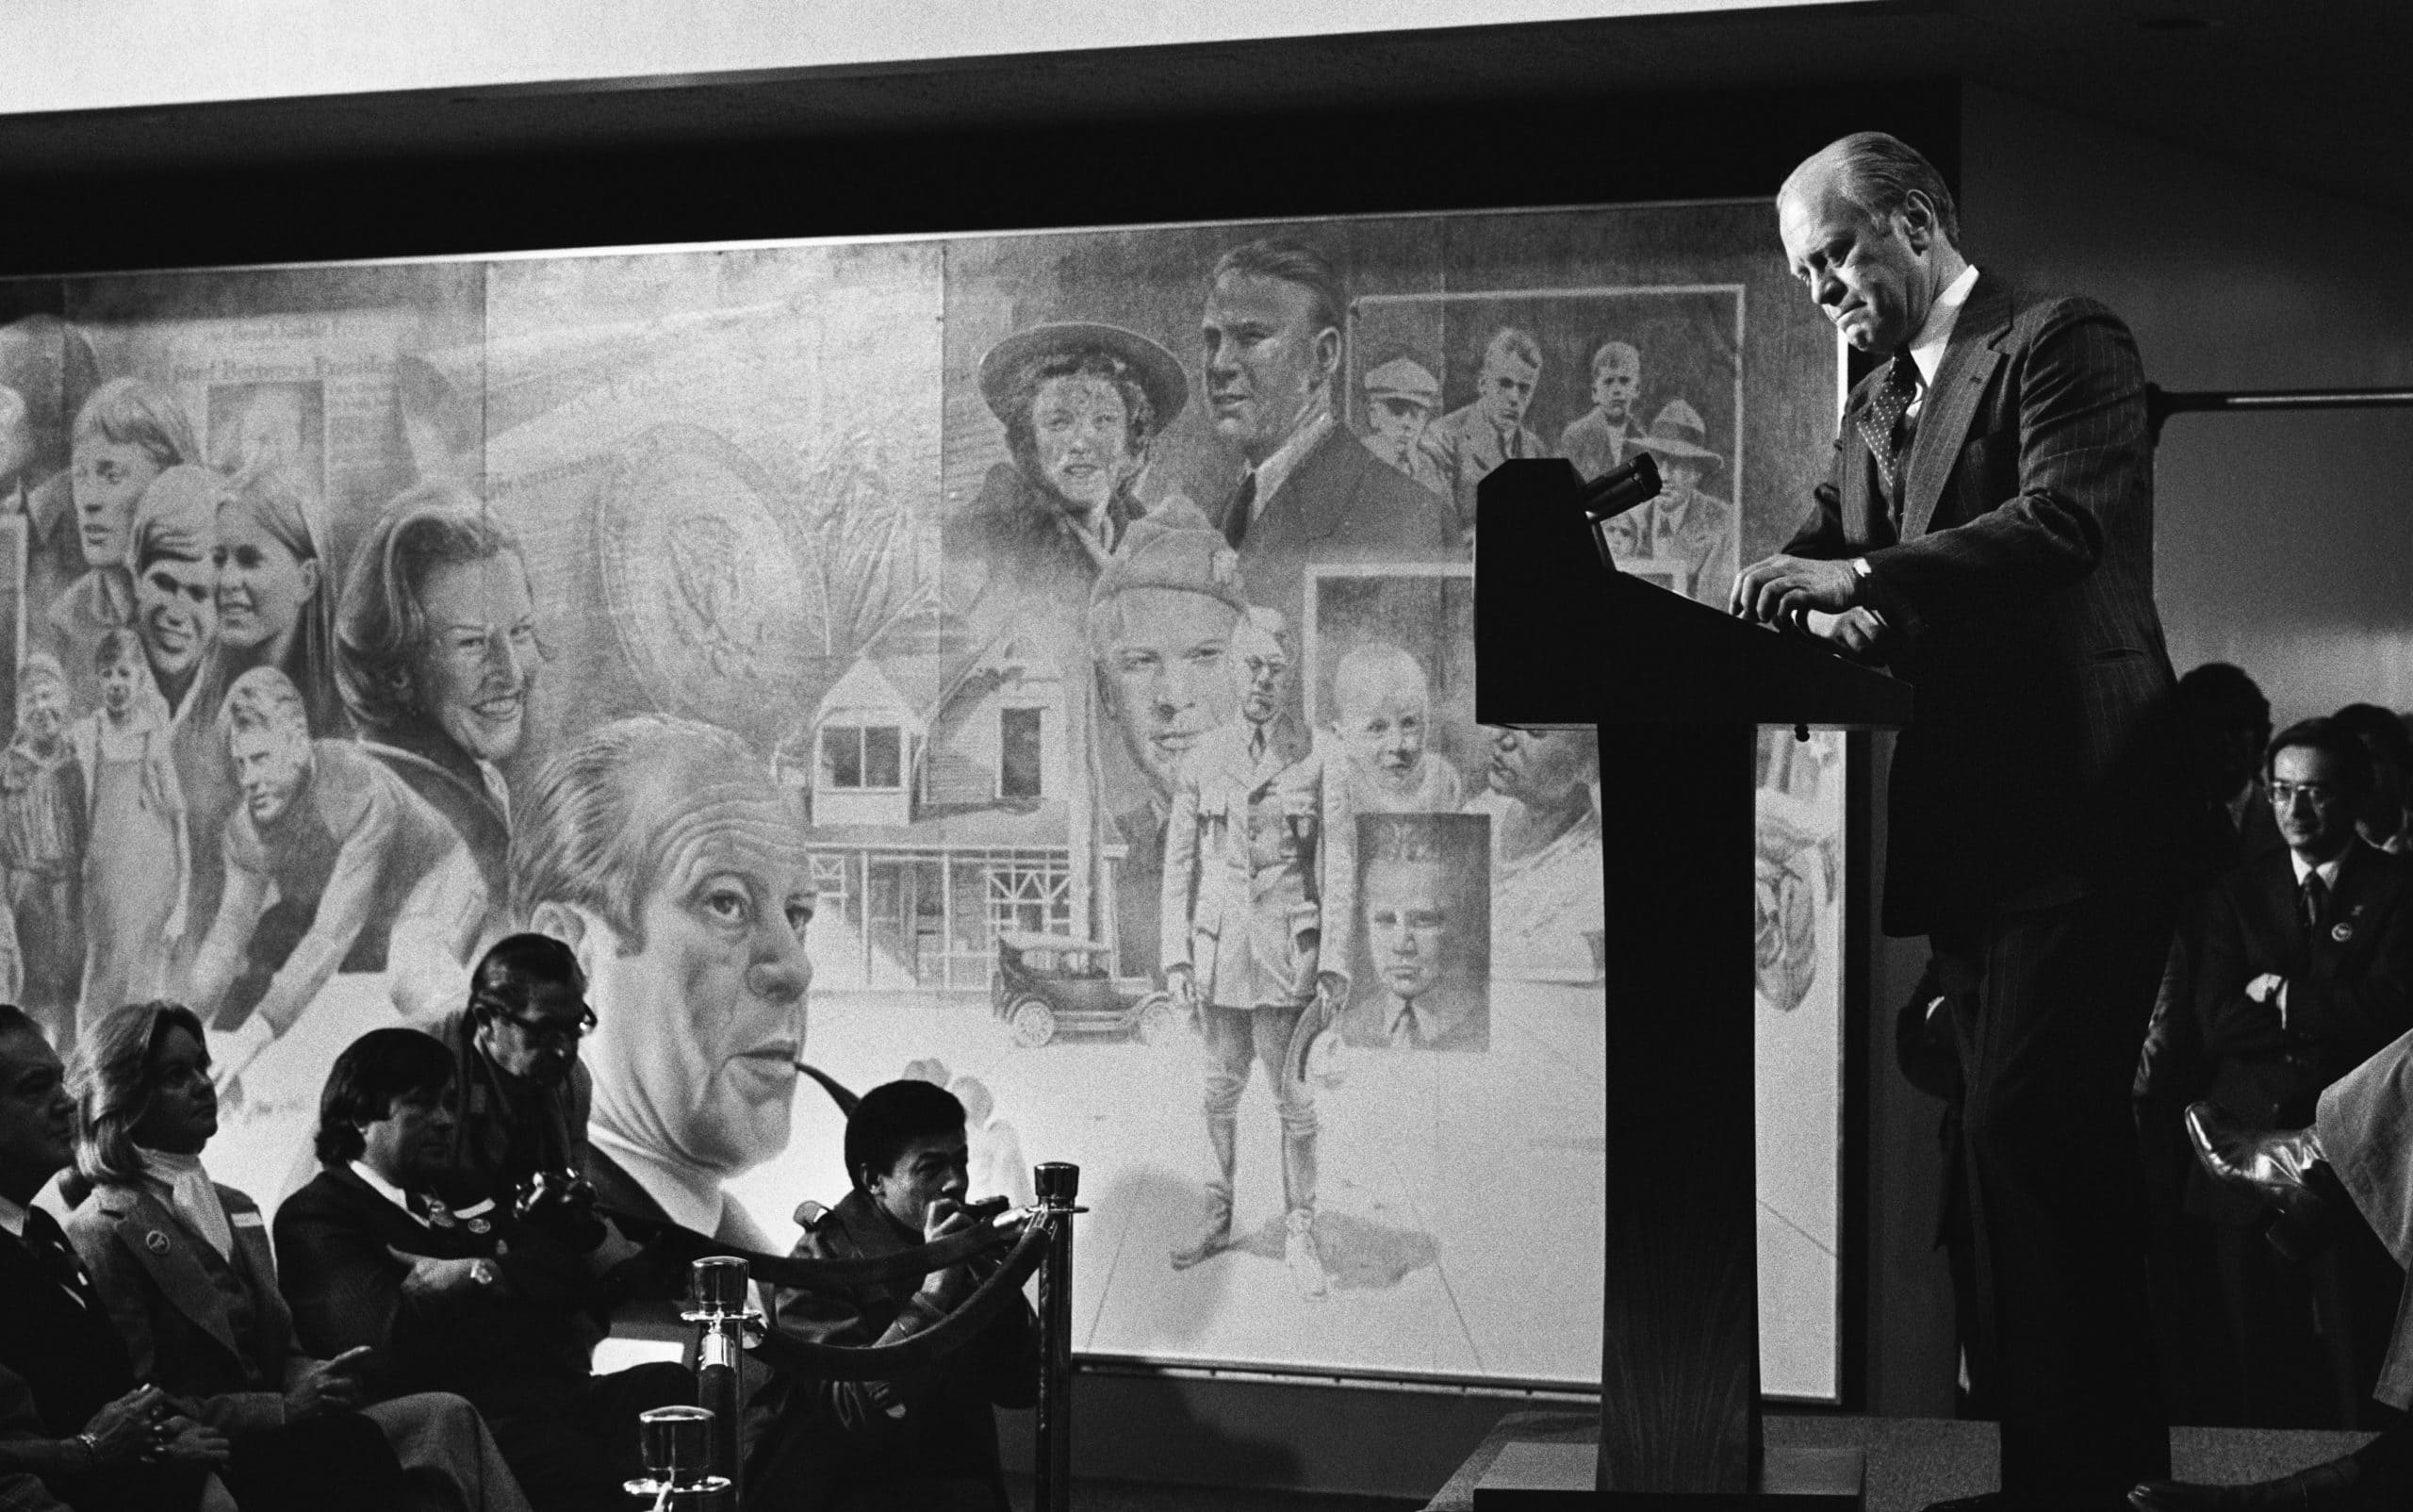 GRAND RAPIDS, MI.  -  NOVEMBER 2: (NO U.S. TABLOID SALES) Exhausted from the grueling campaign, President Ford talks about his life at the dedication of a mural honoring him and his family at the airport on election day November 2, 1976 in Grand Rapids, Michigan. (Photo by David Hume Kennerly/ Getty Images)